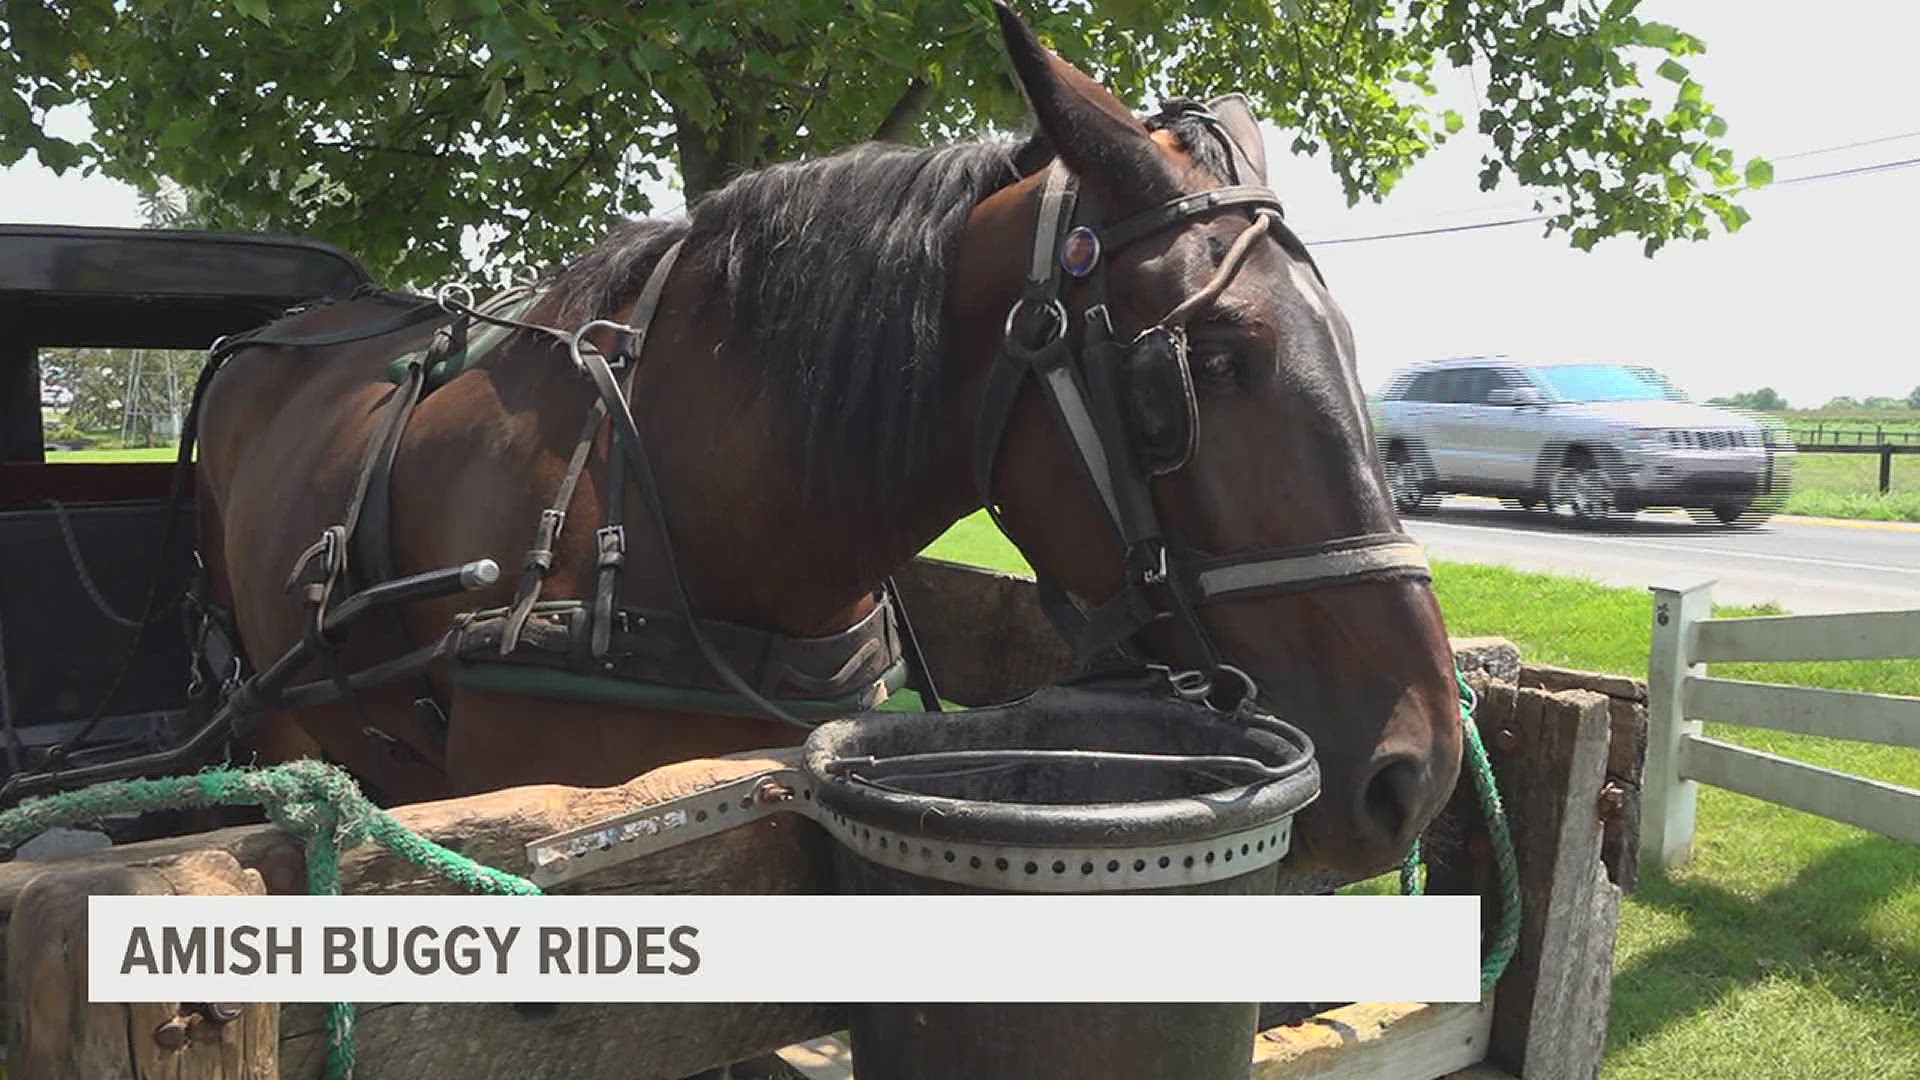 Looking to take a ride back in time and enjoy the gorgeous Lancaster countryside? Take a trip on a local buggy ride and experience a taste of Amish Country.